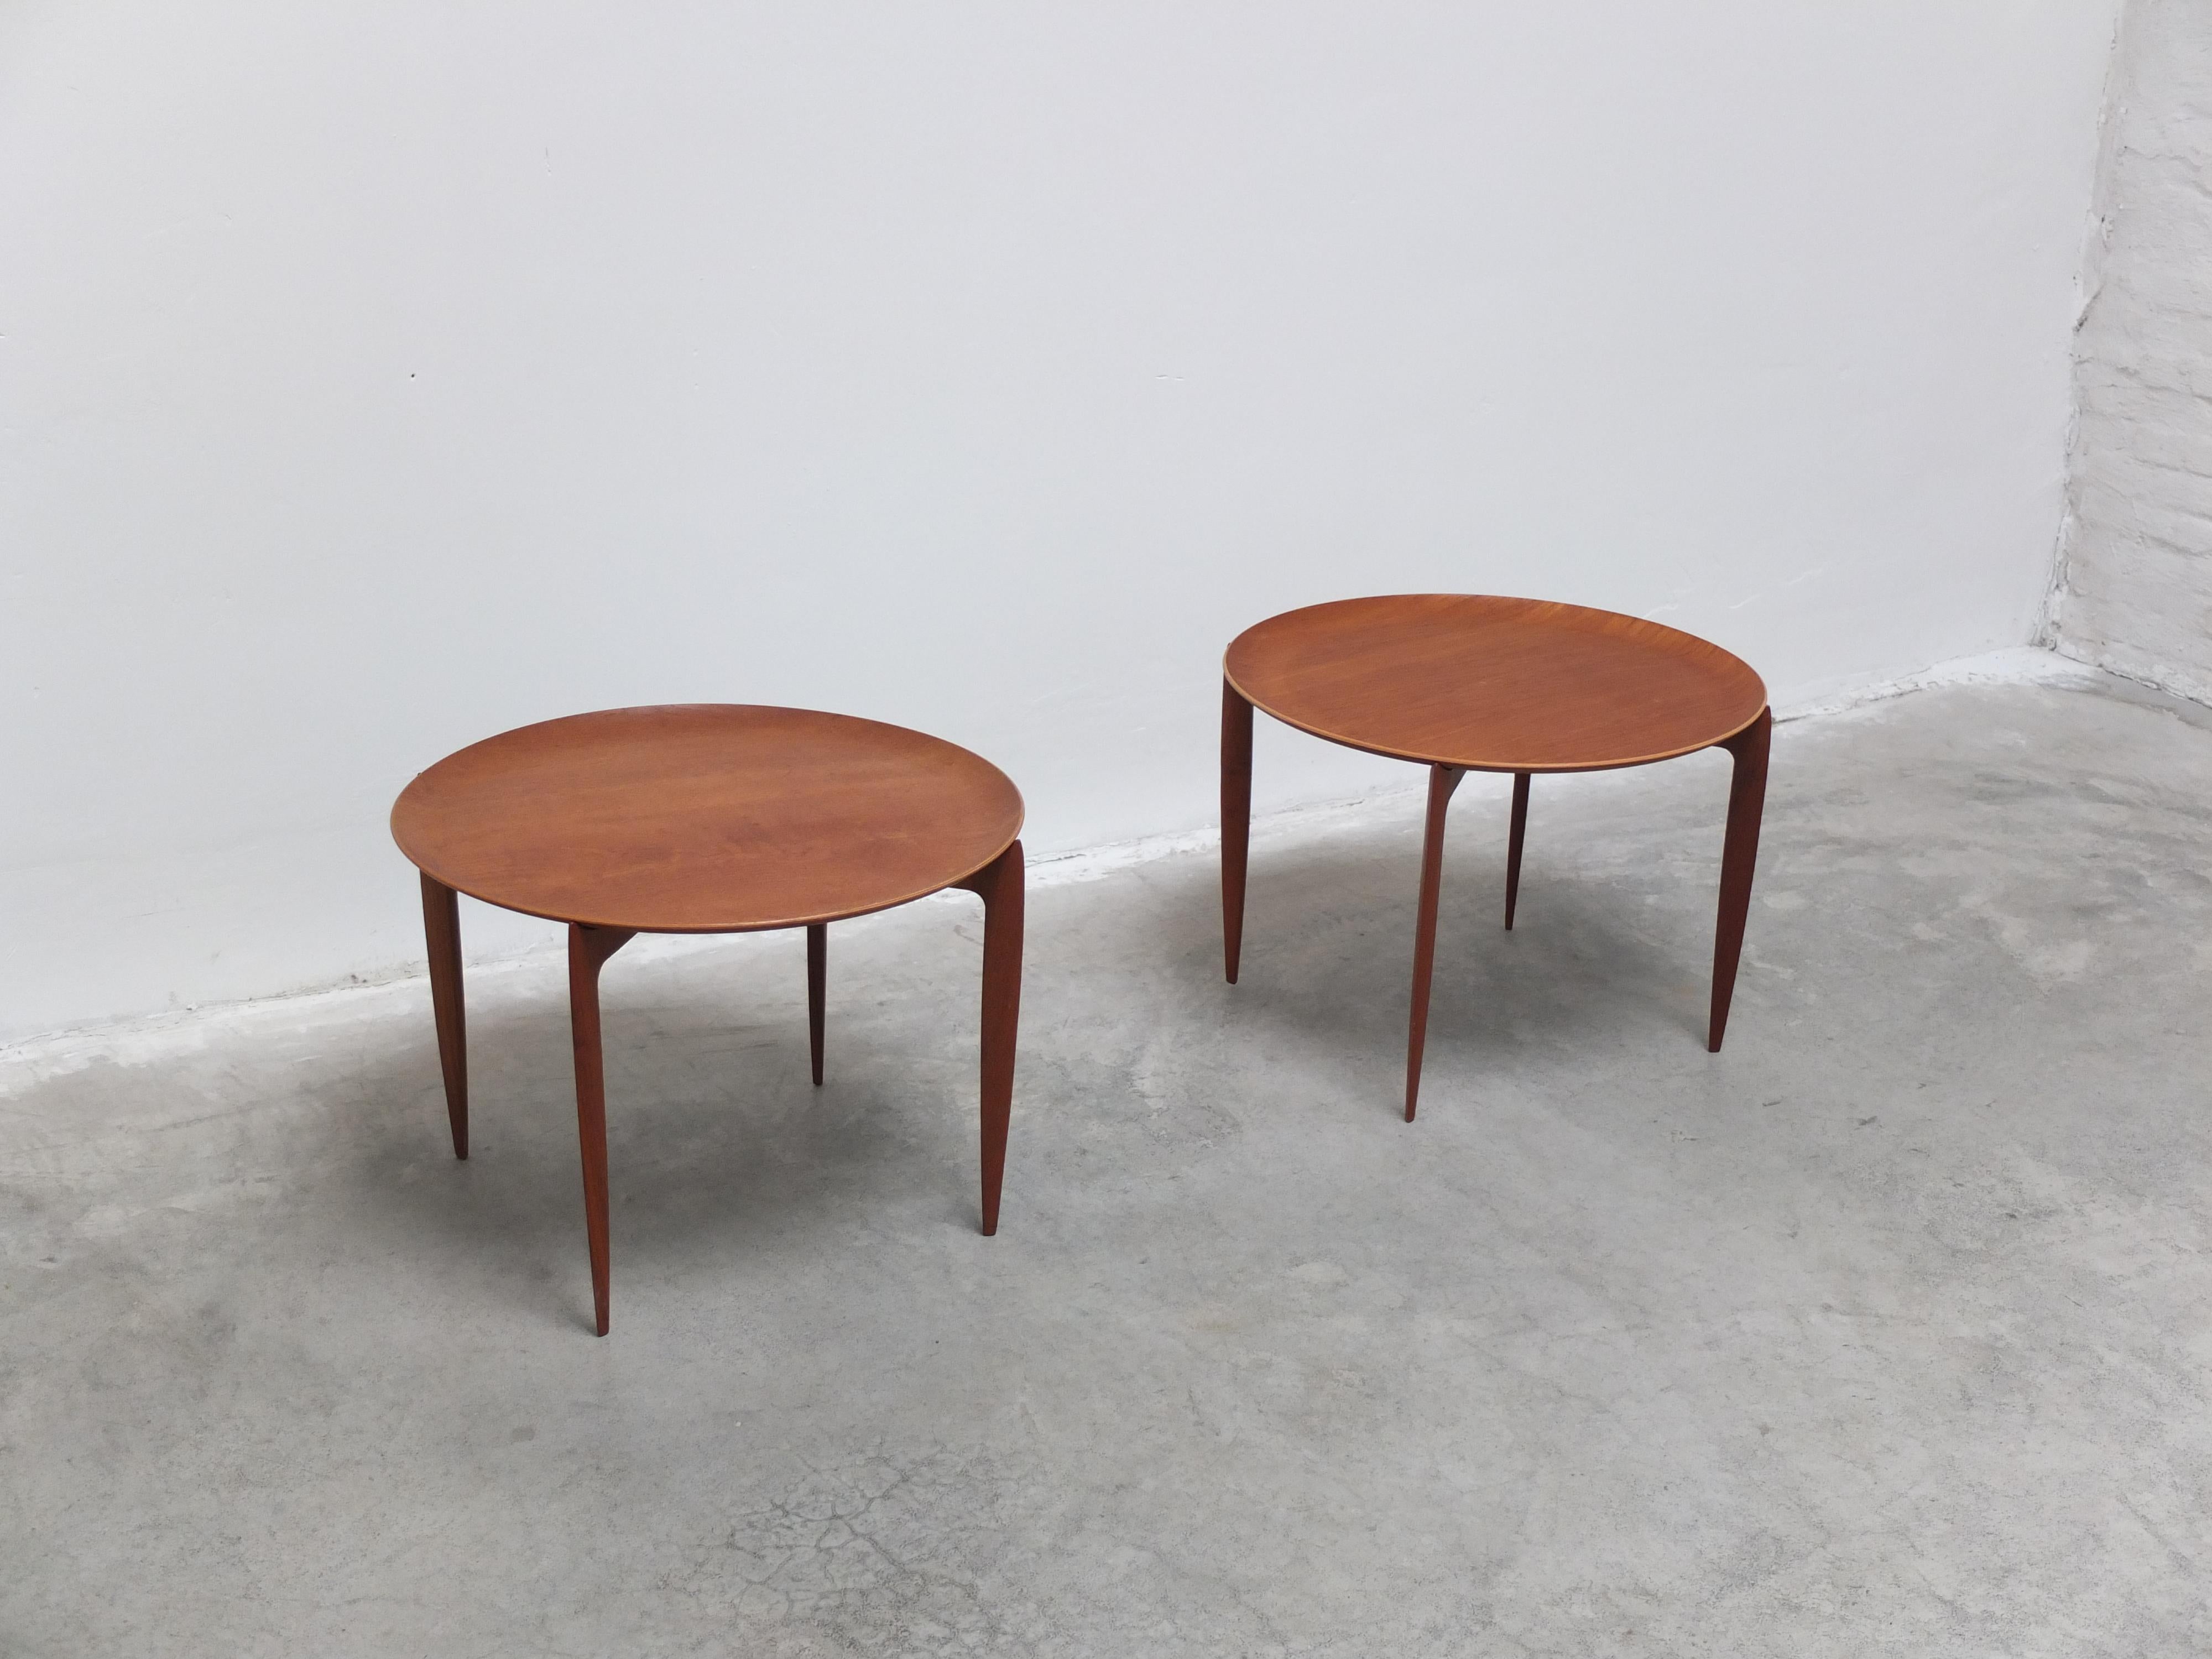 Danish Early Pair of Tray Tables in Teak by Willumsen & Engholm for Fritz Hansen, 1958 For Sale